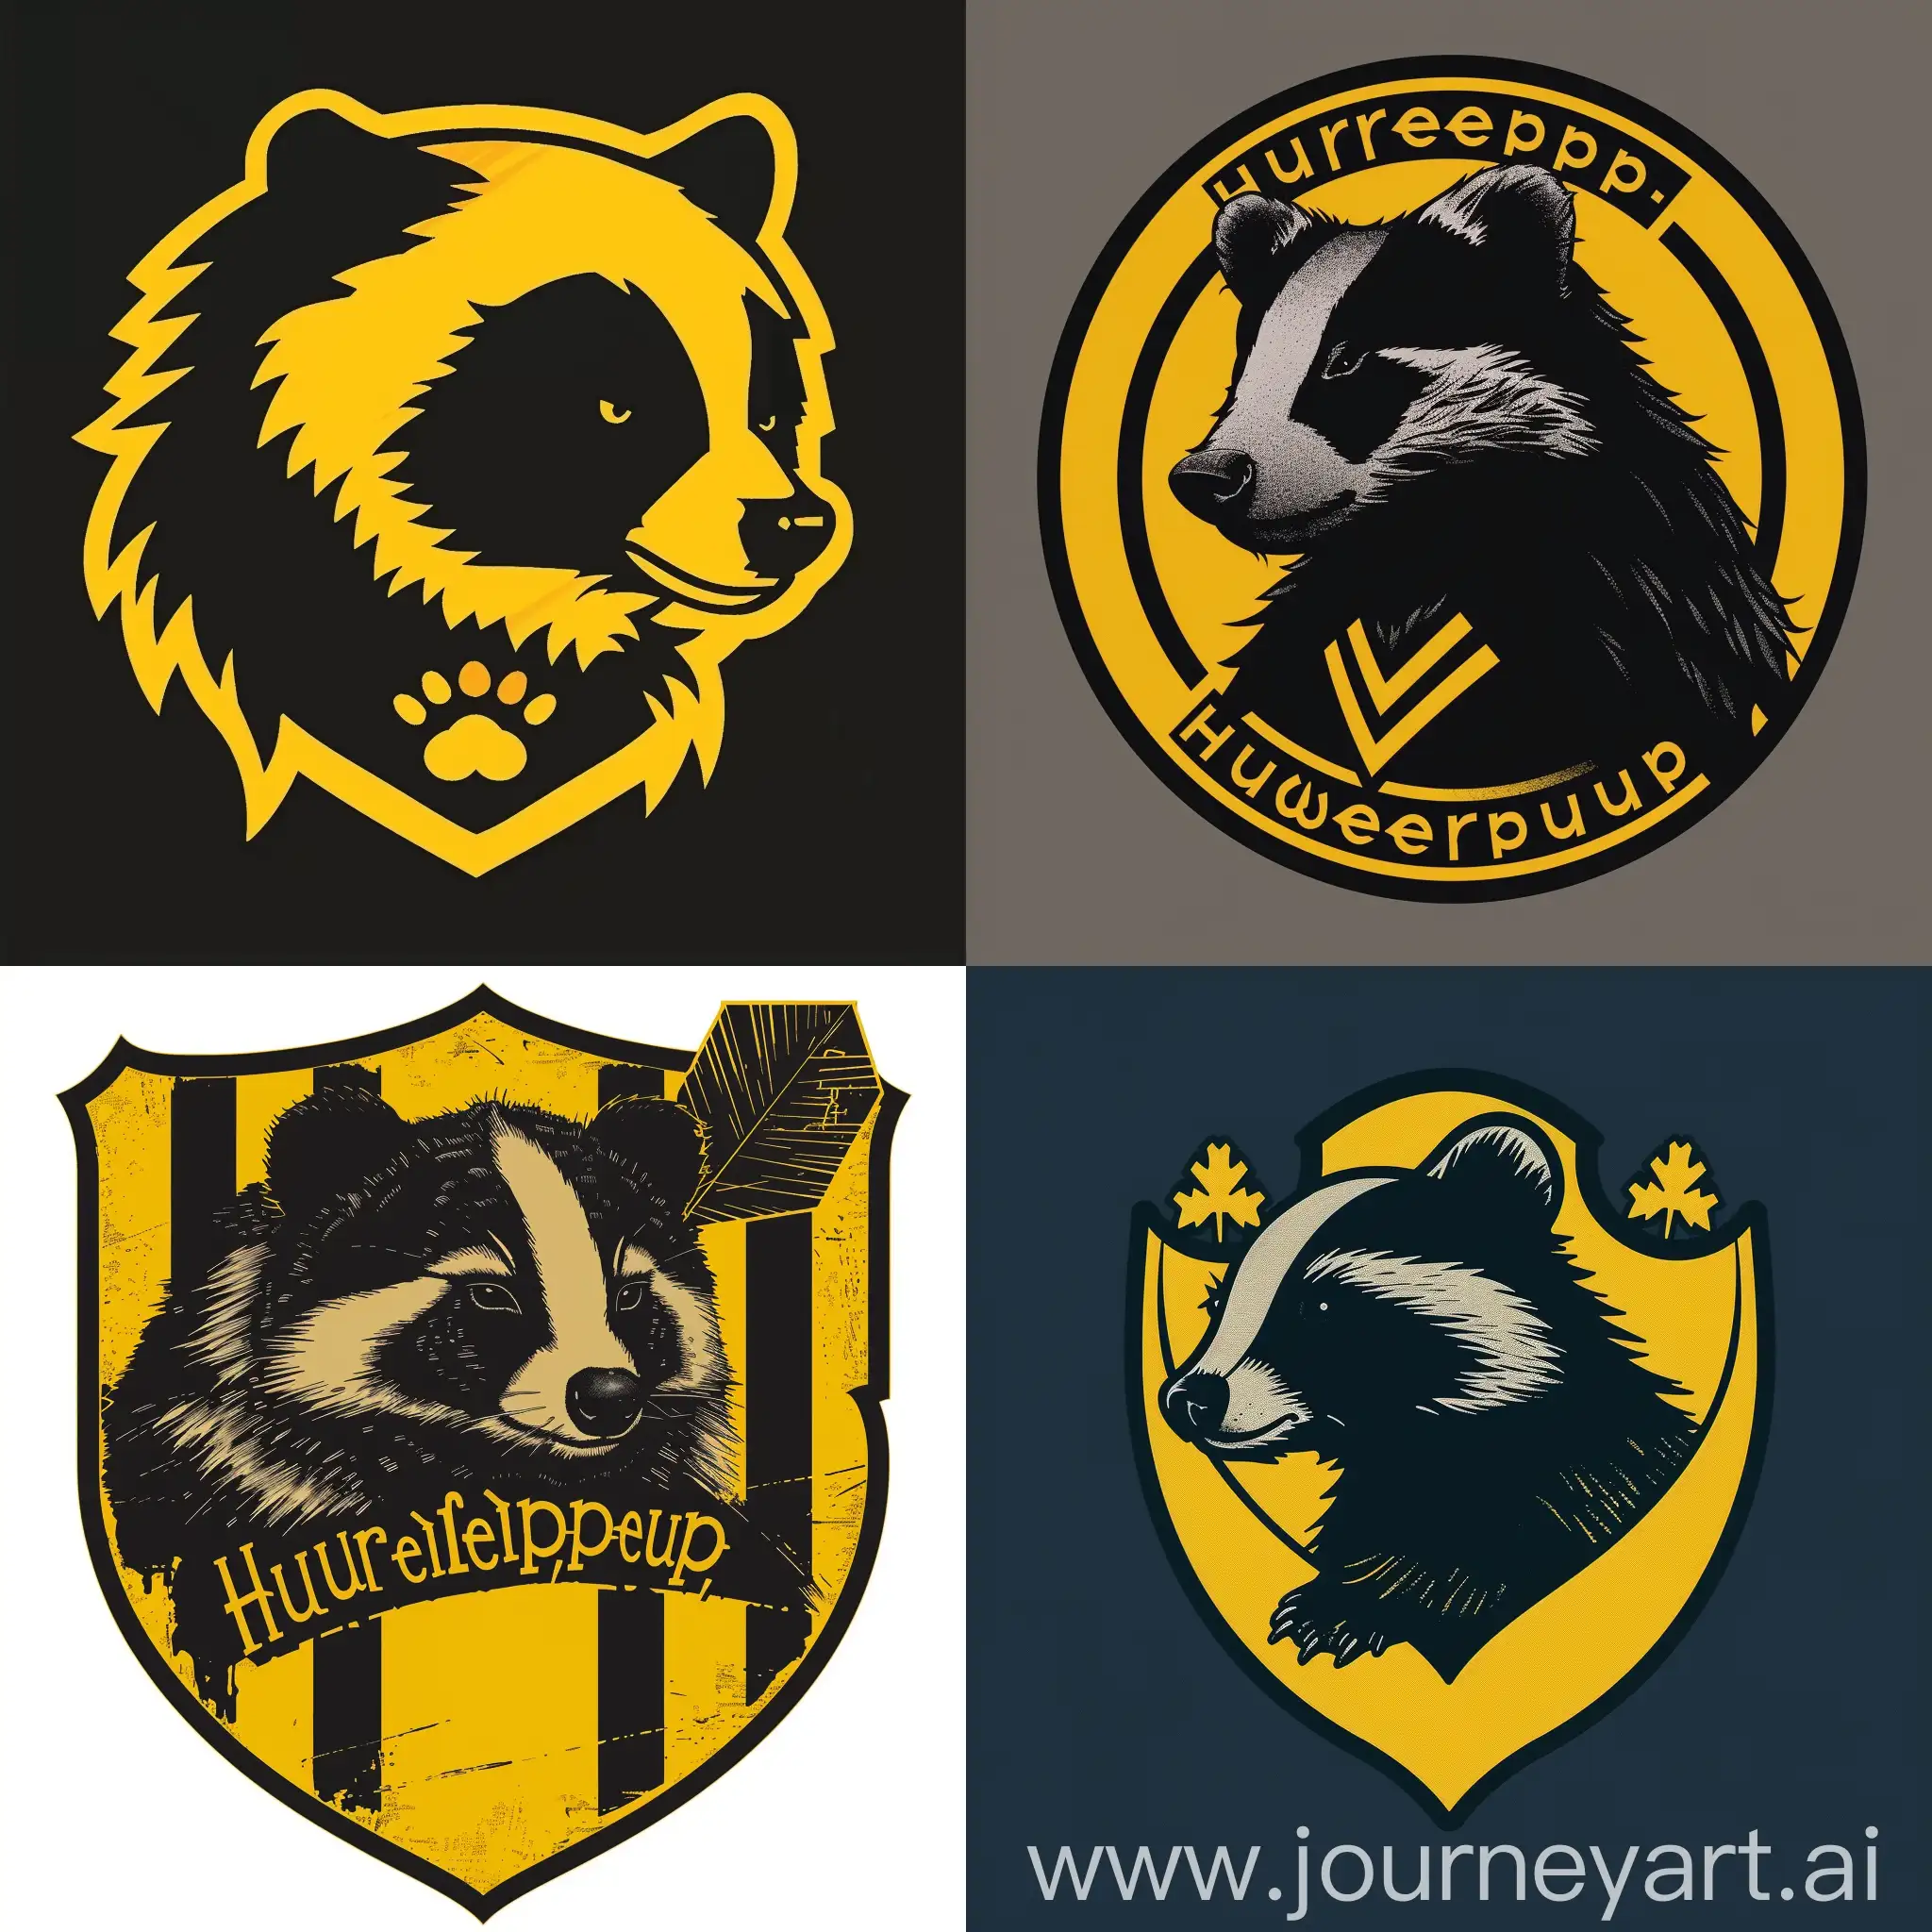 Hufflepuff-Faculty-from-Harry-Potter-Black-and-Yellow-Badger-Logo